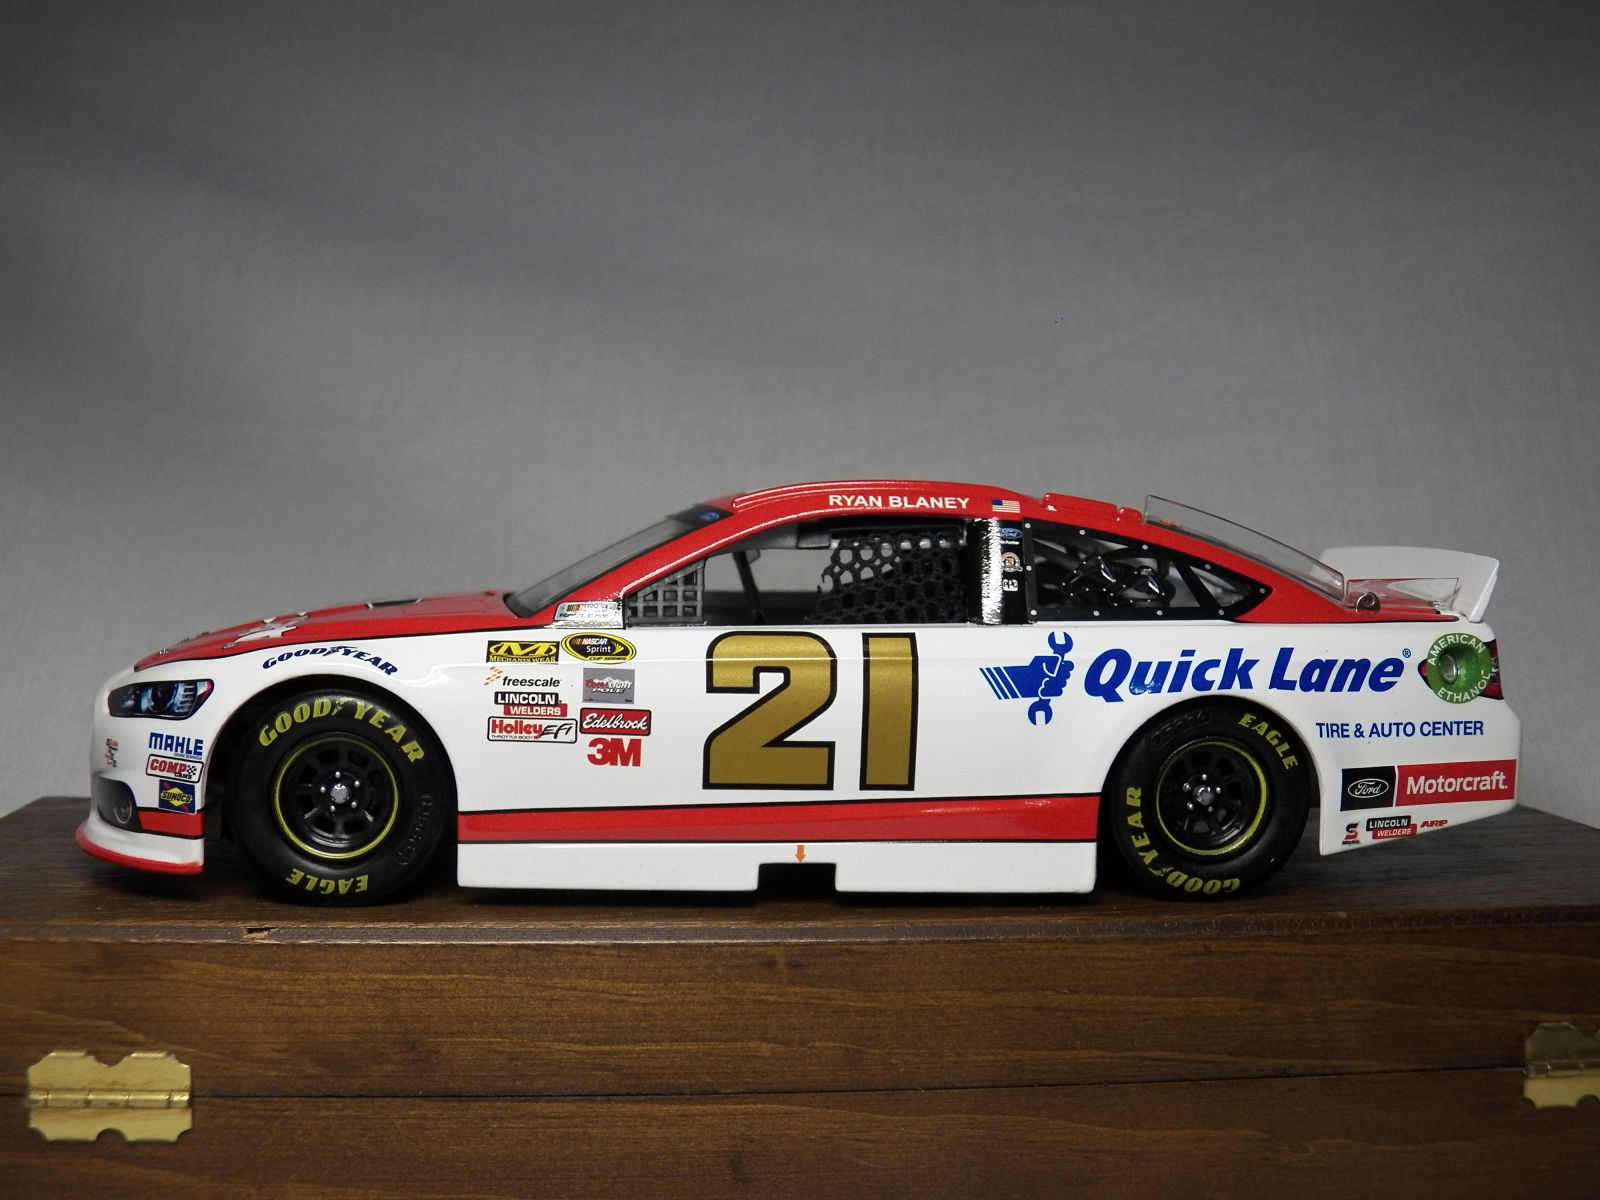 Illustration for article titled Lionel Racing 1/24 Scale Ryan Blaney NASCAR